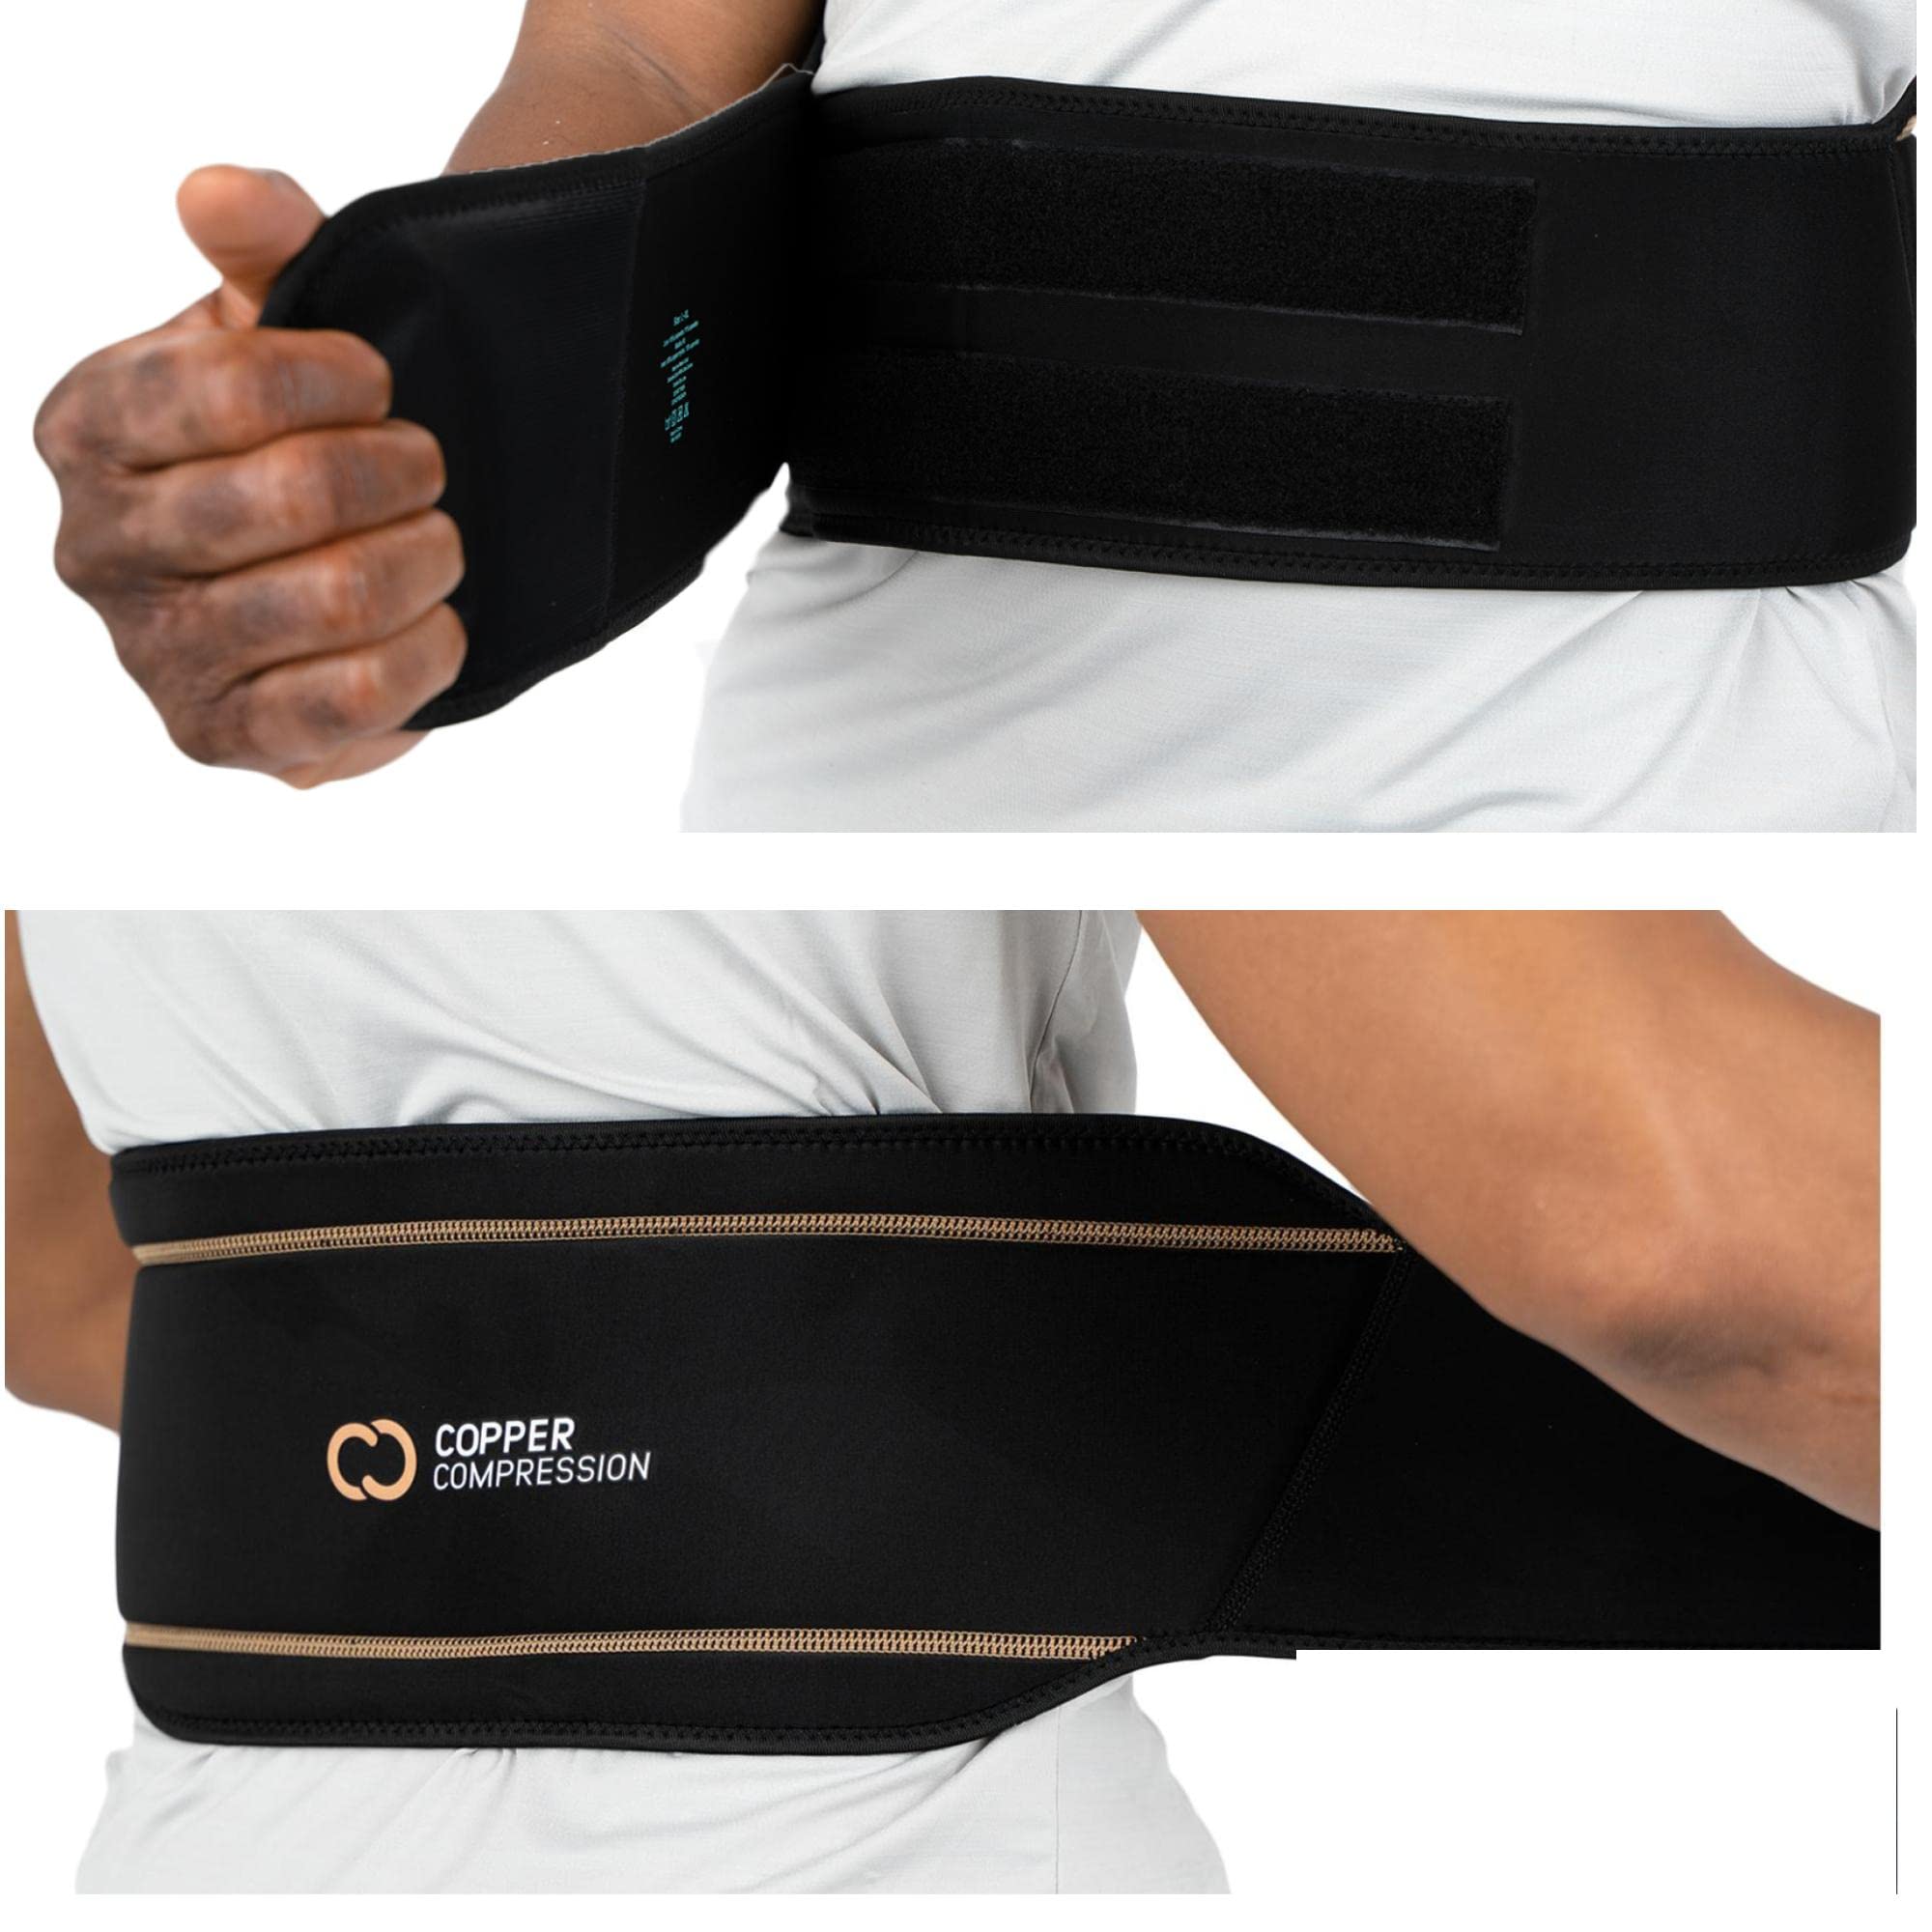 Copper Compression Lower Back Lumbar Support Recovery Brace for